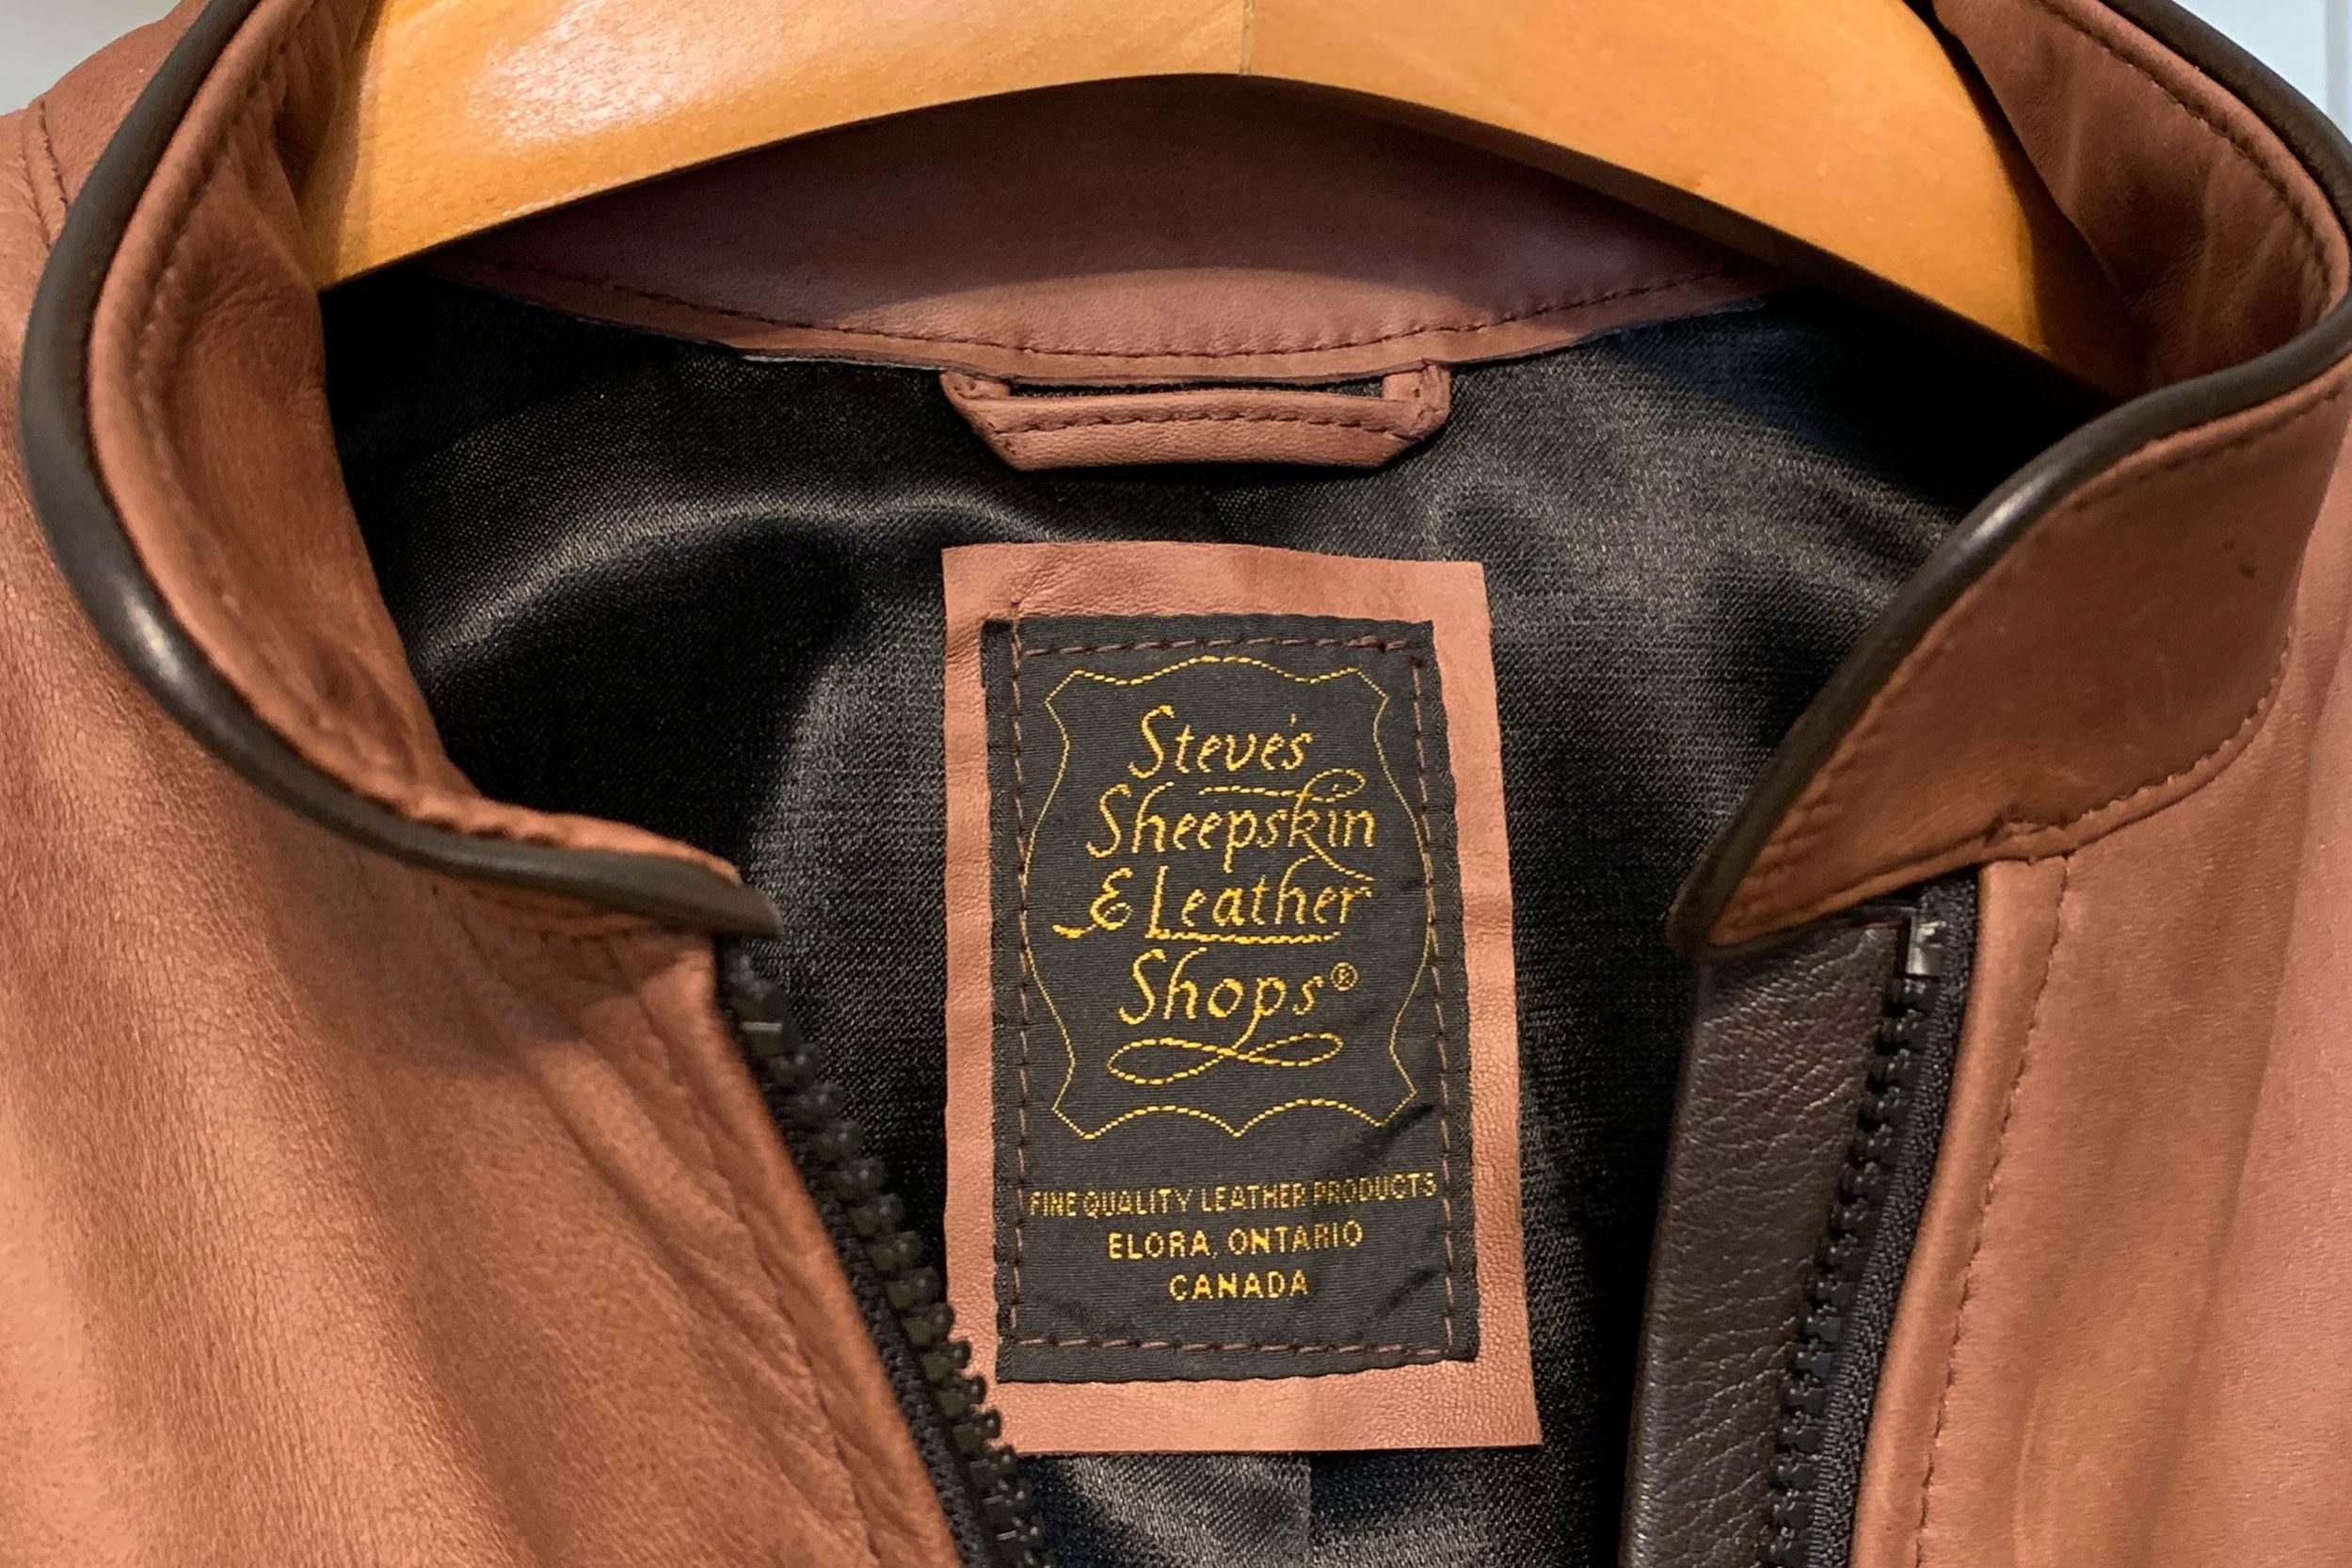 Steve’s Sheepskin & Leather Shop | One-stop-shop for high-quality goods